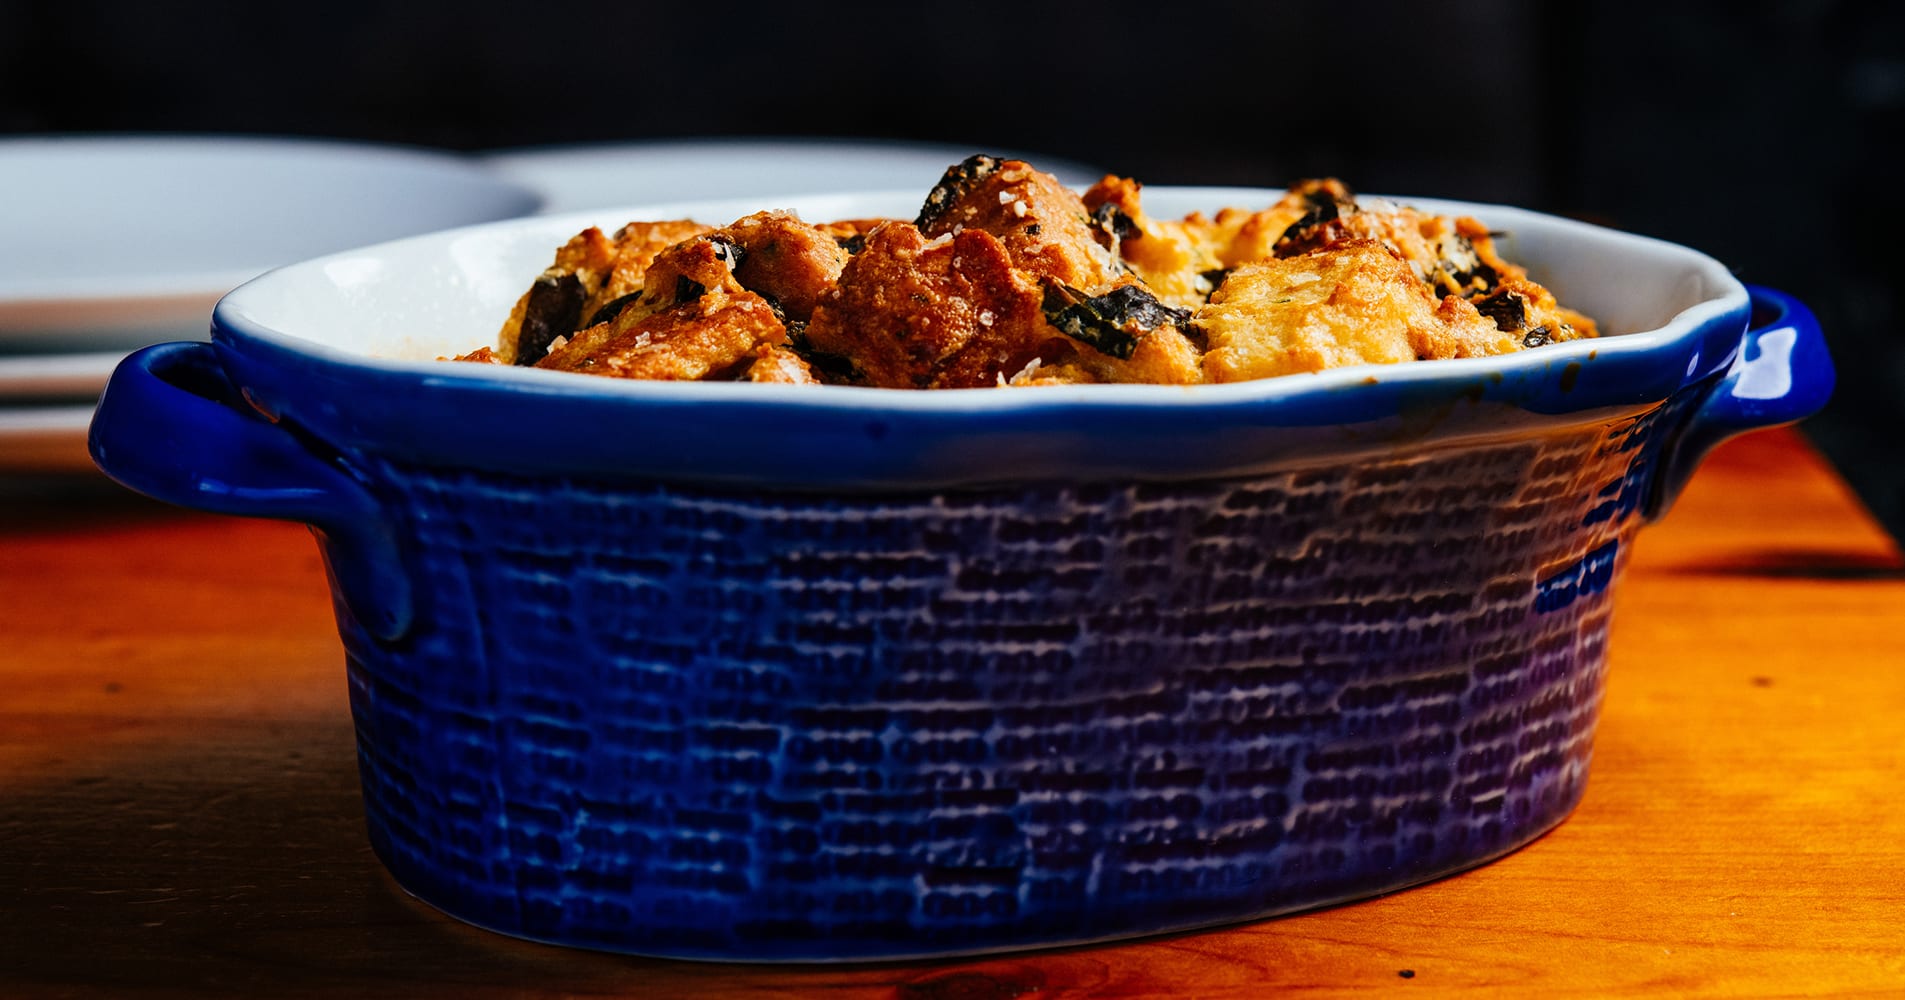 Savory Bread Pudding with Creamed Greens